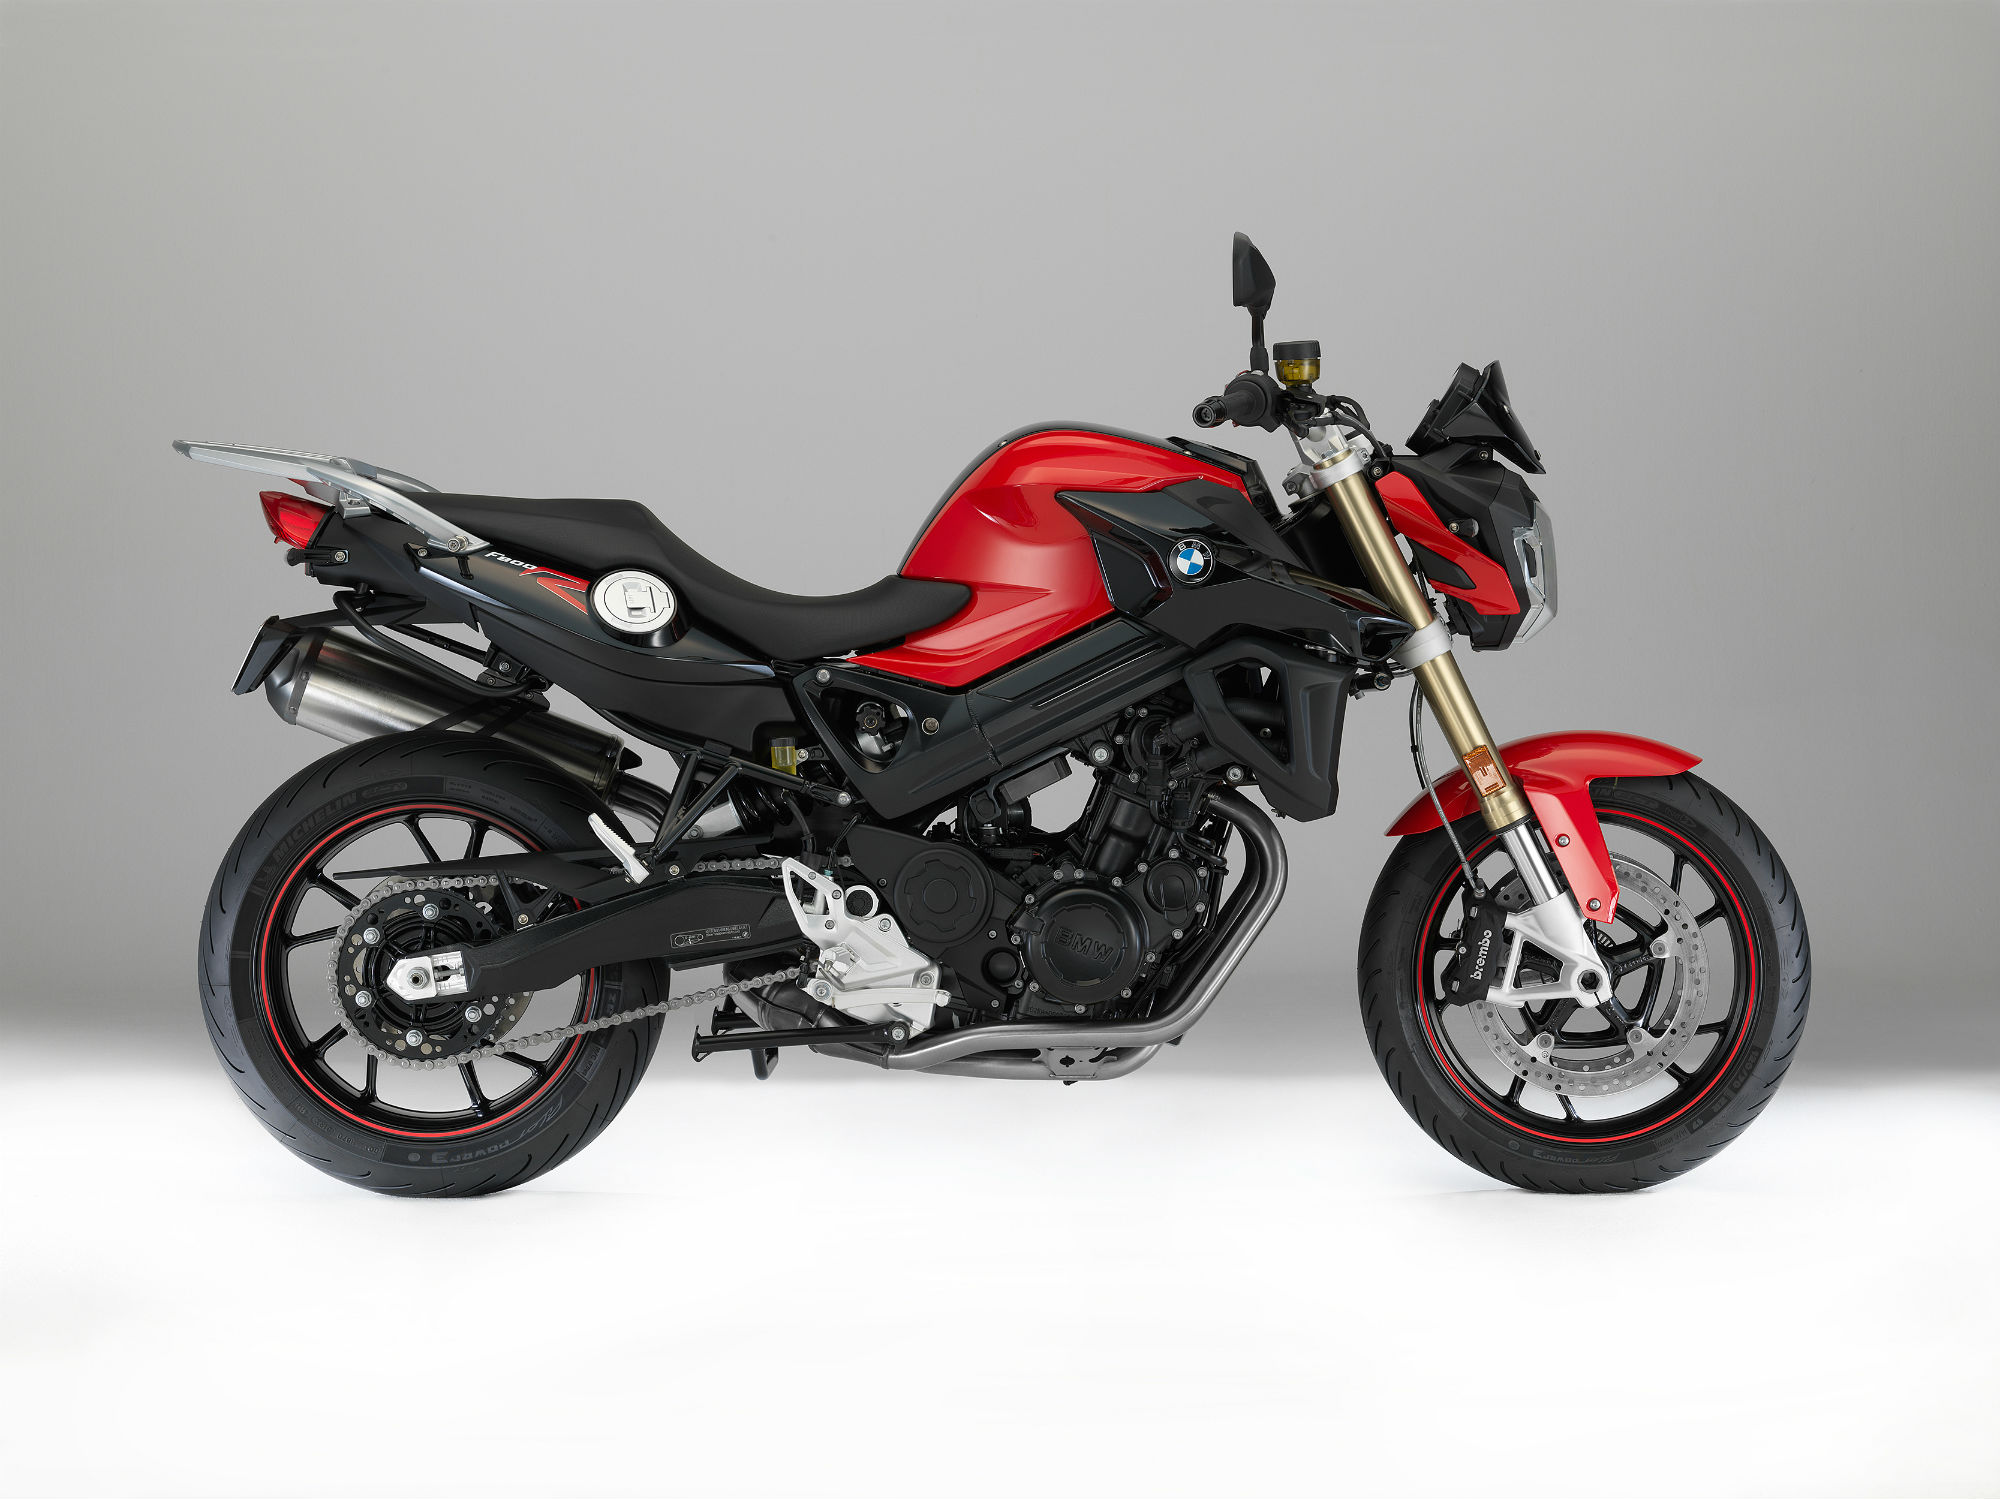 Updated BMW F800R and F800GT revealed